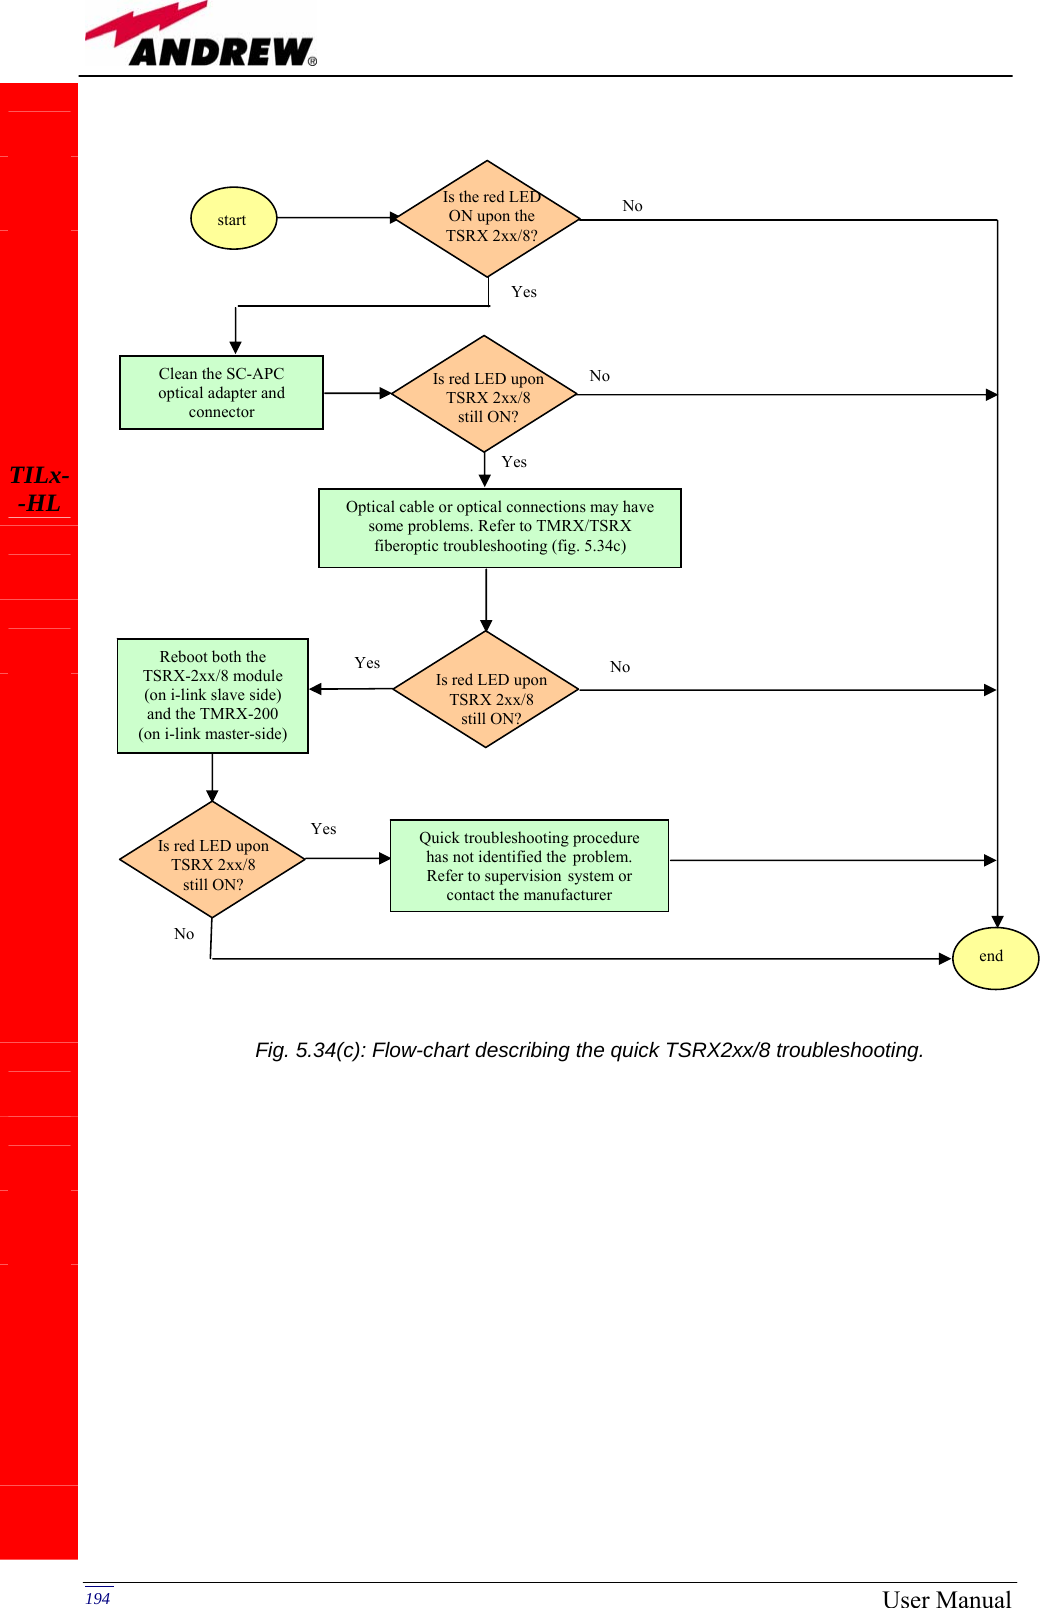   194  User Manual         TILx- -HL               Fig. 5.34(c): Flow-chart describing the quick TSRX2xx/8 troubleshooting. start Is the red LED ON upon the TSRX 2xx/8? Yes No Clean the SC-APC optical adapter and connector No Yes end Is red LED upon TSRX 2xx/8  still ON?Optical cable or optical connections may have some problems. Refer to TMRX/TSRX fiberoptic troubleshooting (fig. 5.34c) Yes Is red LED upon TSRX 2xx/8  still ON?No Reboot both the  TSRX-2xx/8 module  (on i-link slave side)  and the TMRX-200 (on i-link master-side) Is red LED upon TSRX 2xx/8  still ON? Quick troubleshooting procedure has not identified the problem. Refer to supervision system or contact the manufacturerYes No 